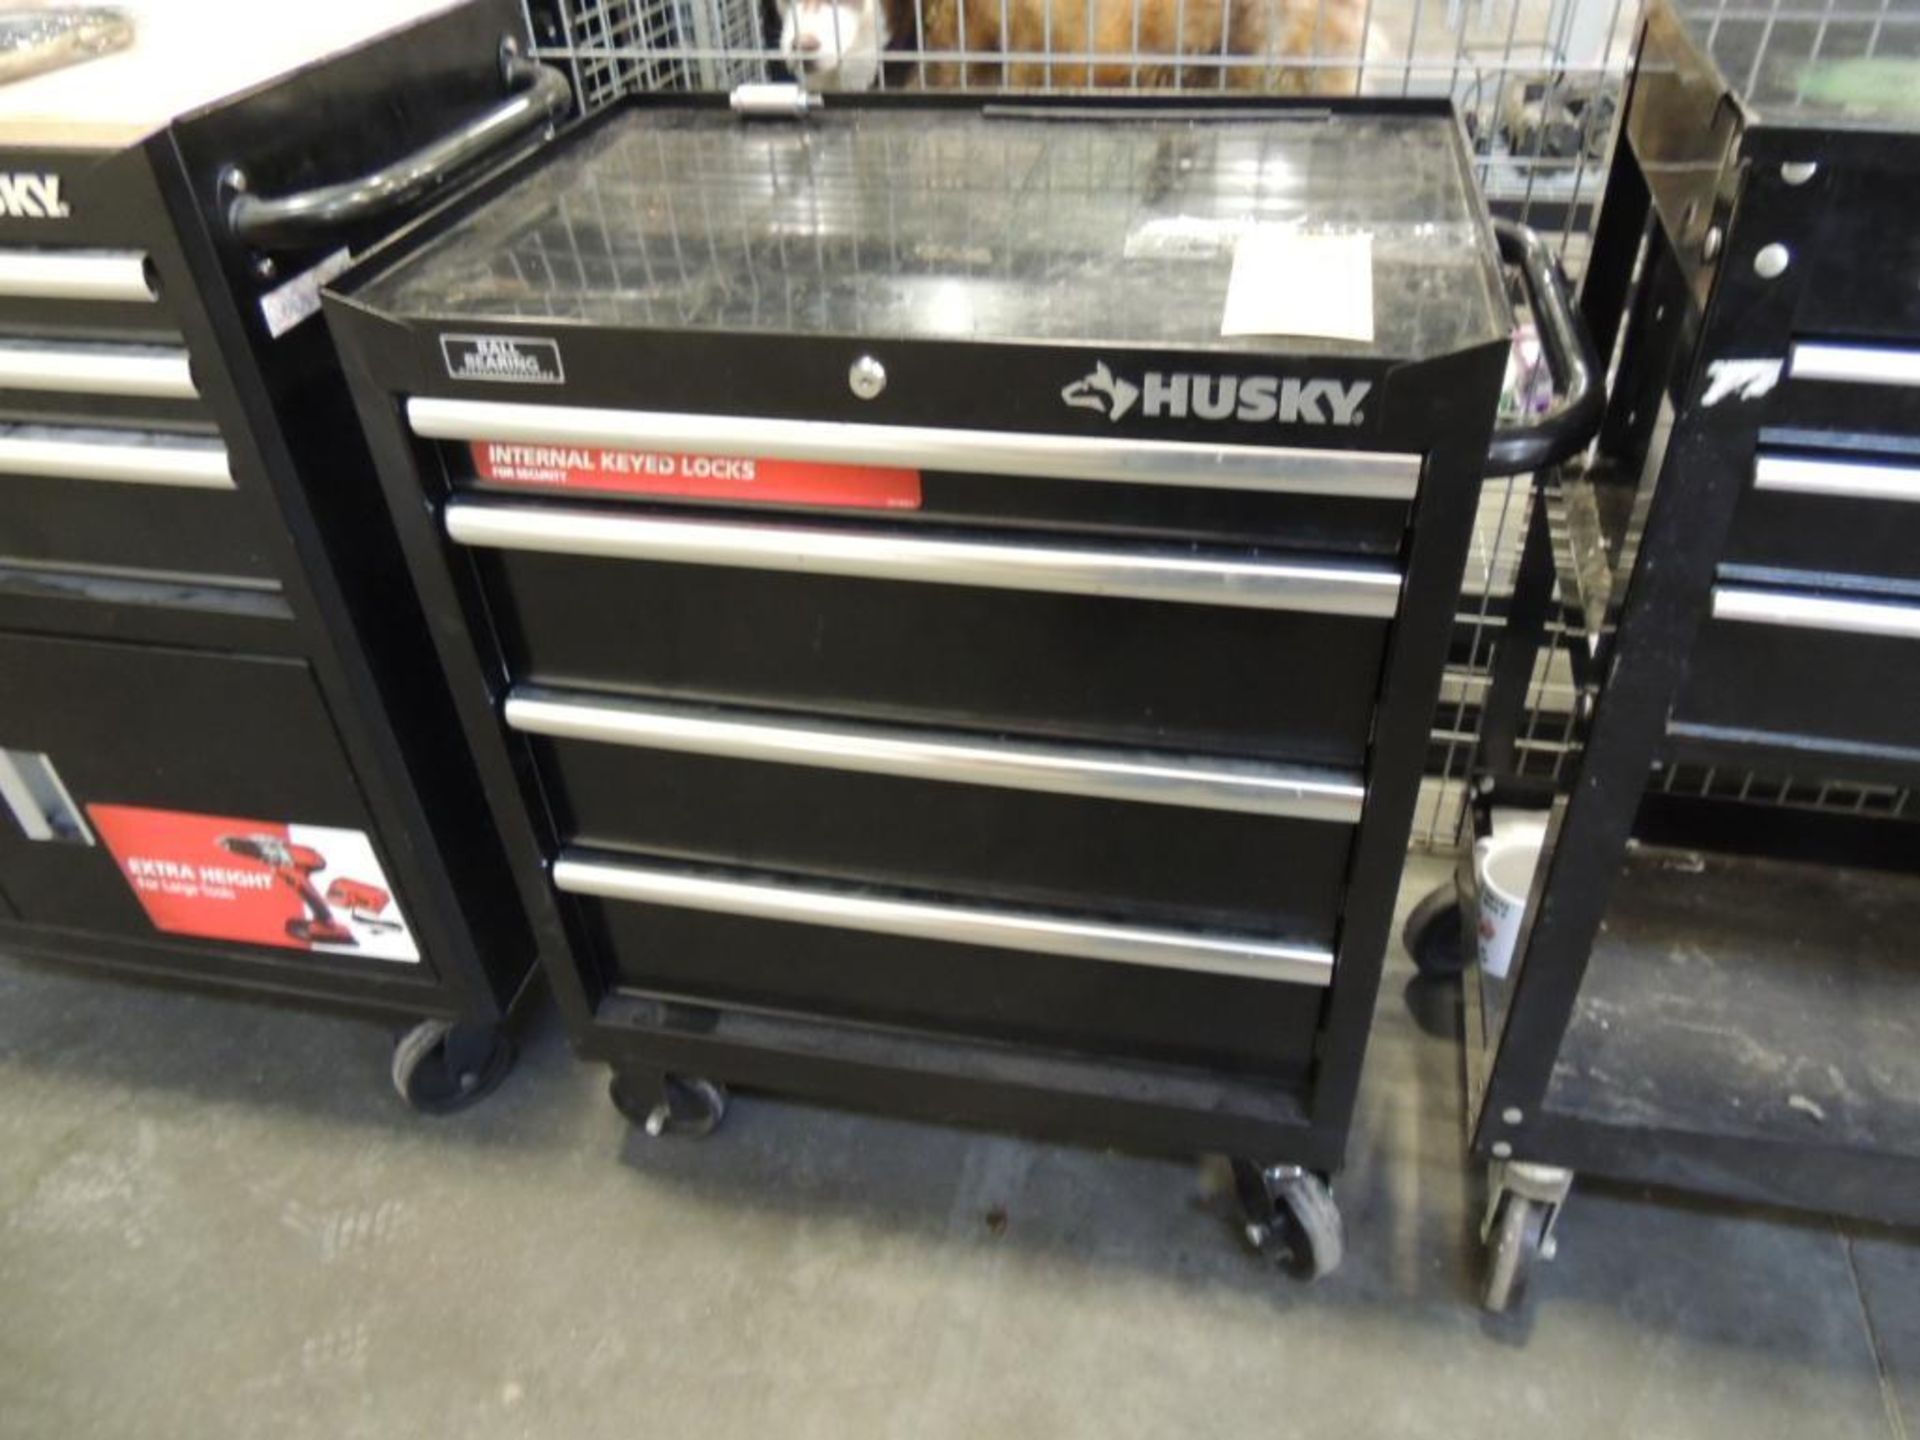 Husky 18 in. x 27 in., 4-Drawer Ball Bearing Tool Box, on Casters